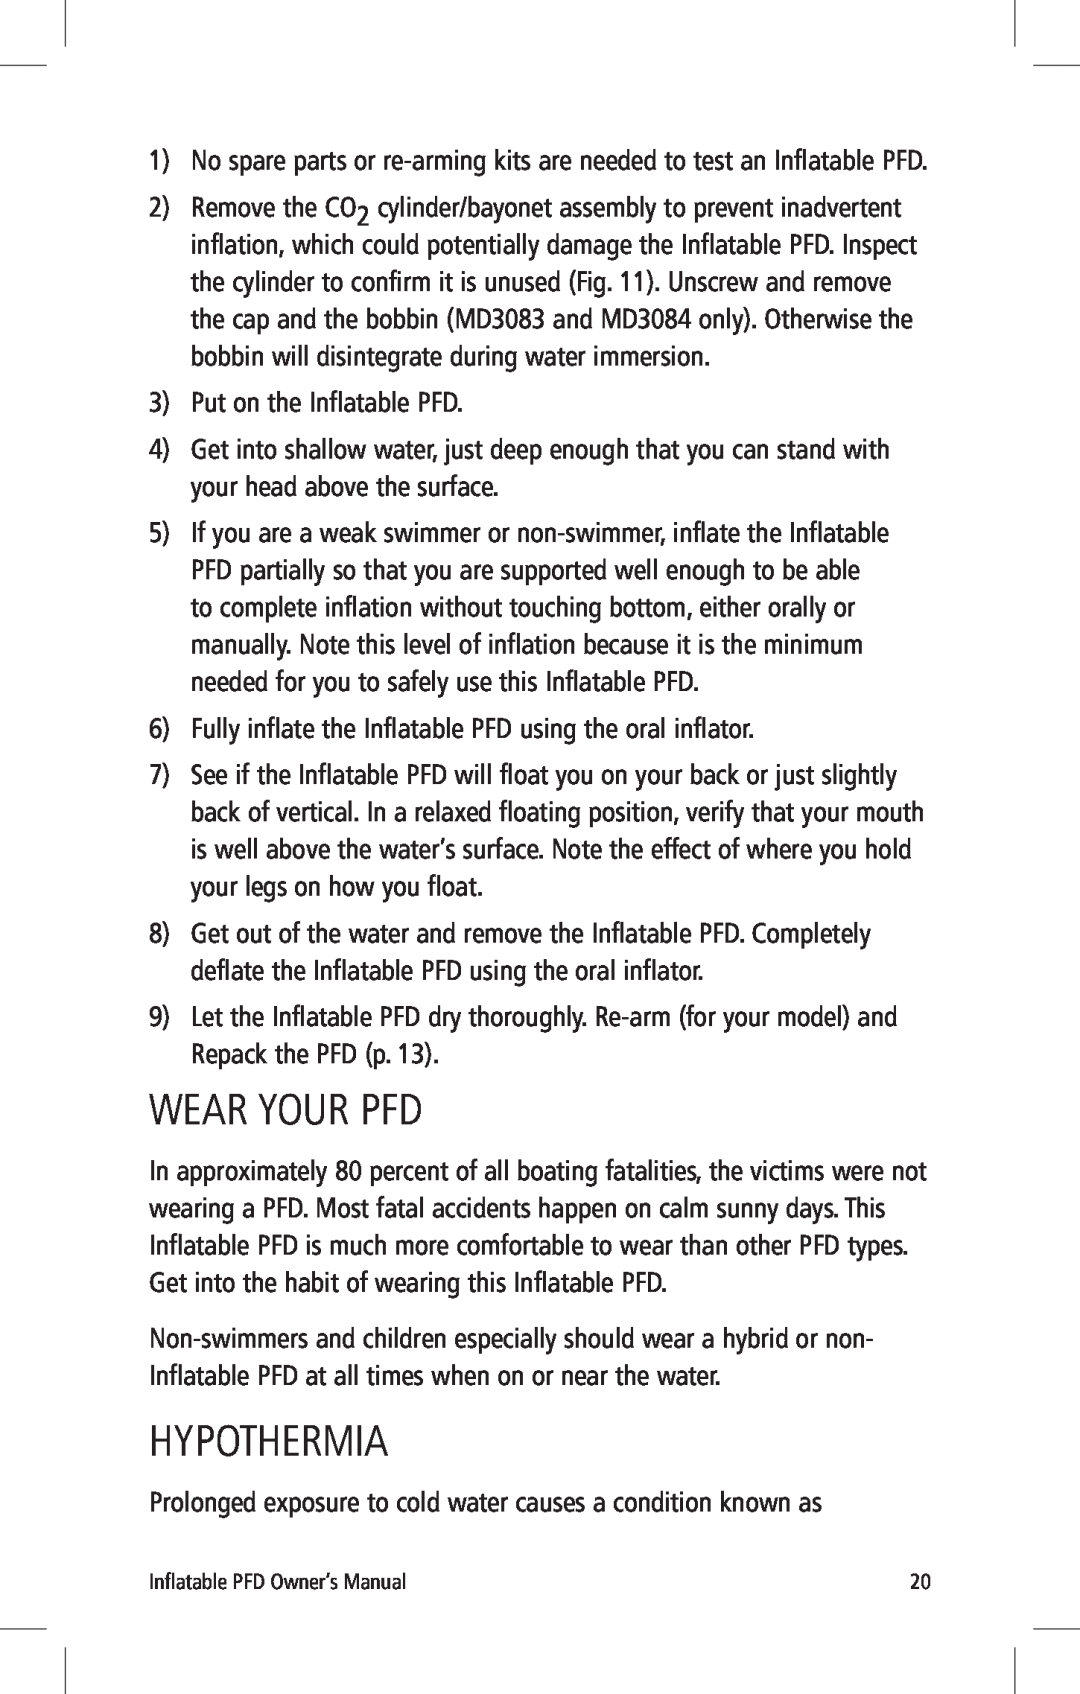 Mustang Survival MD3081, MD3084, MD3083, MD3082 manual Wear Your Pfd, Hypothermia 